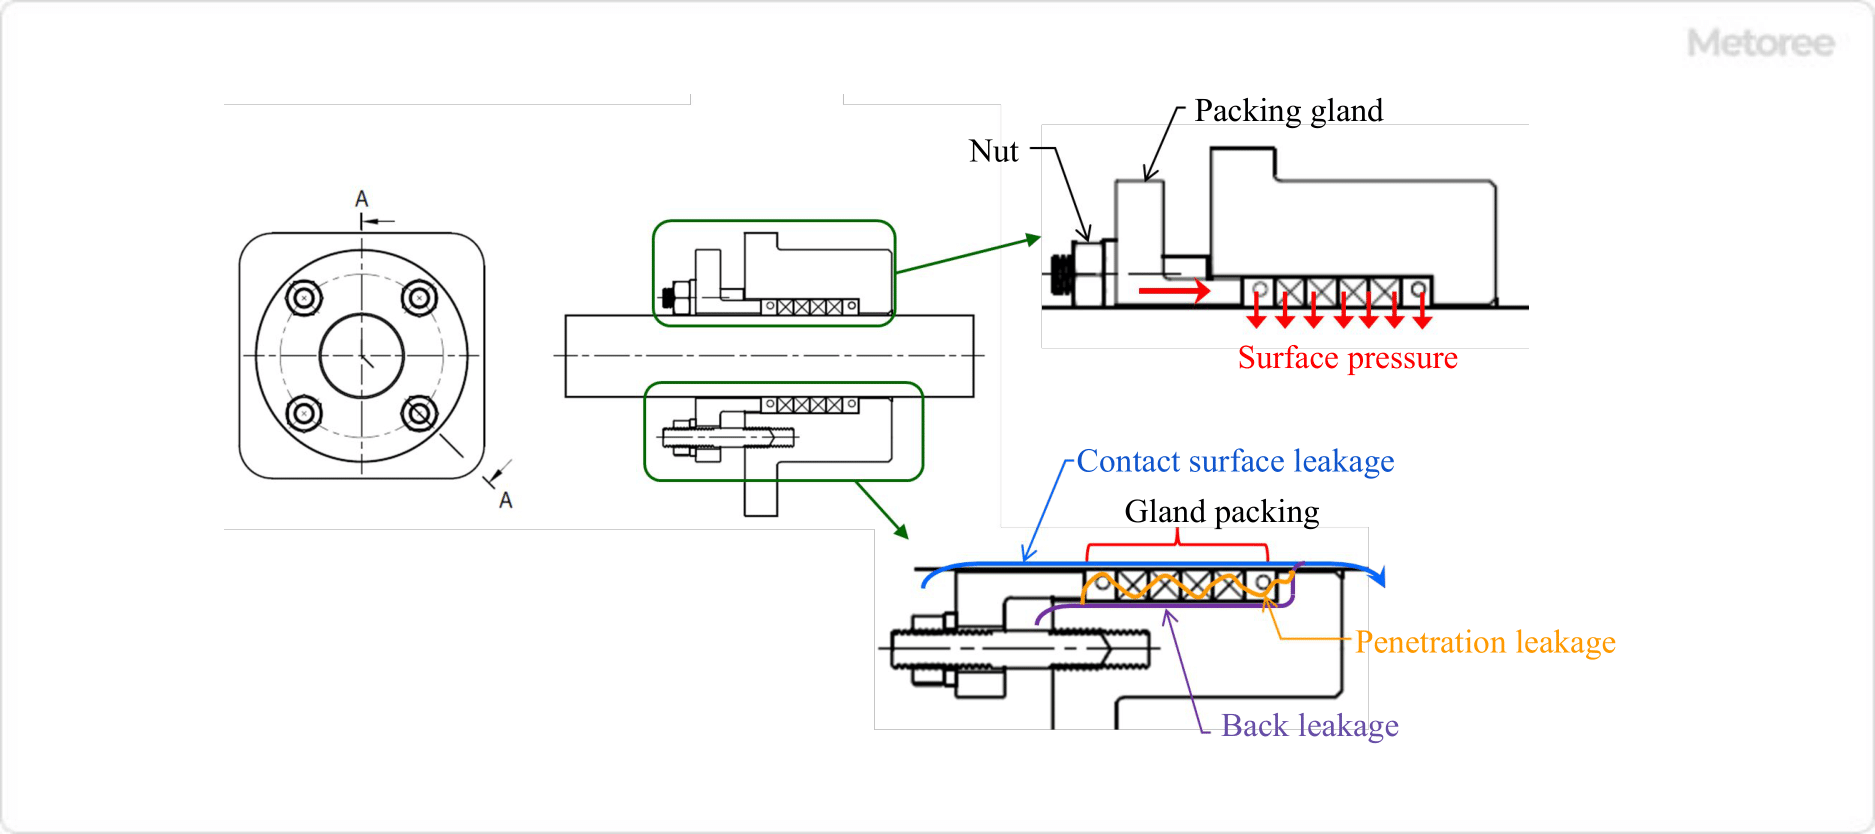 Figure 1. Principle of gland packing